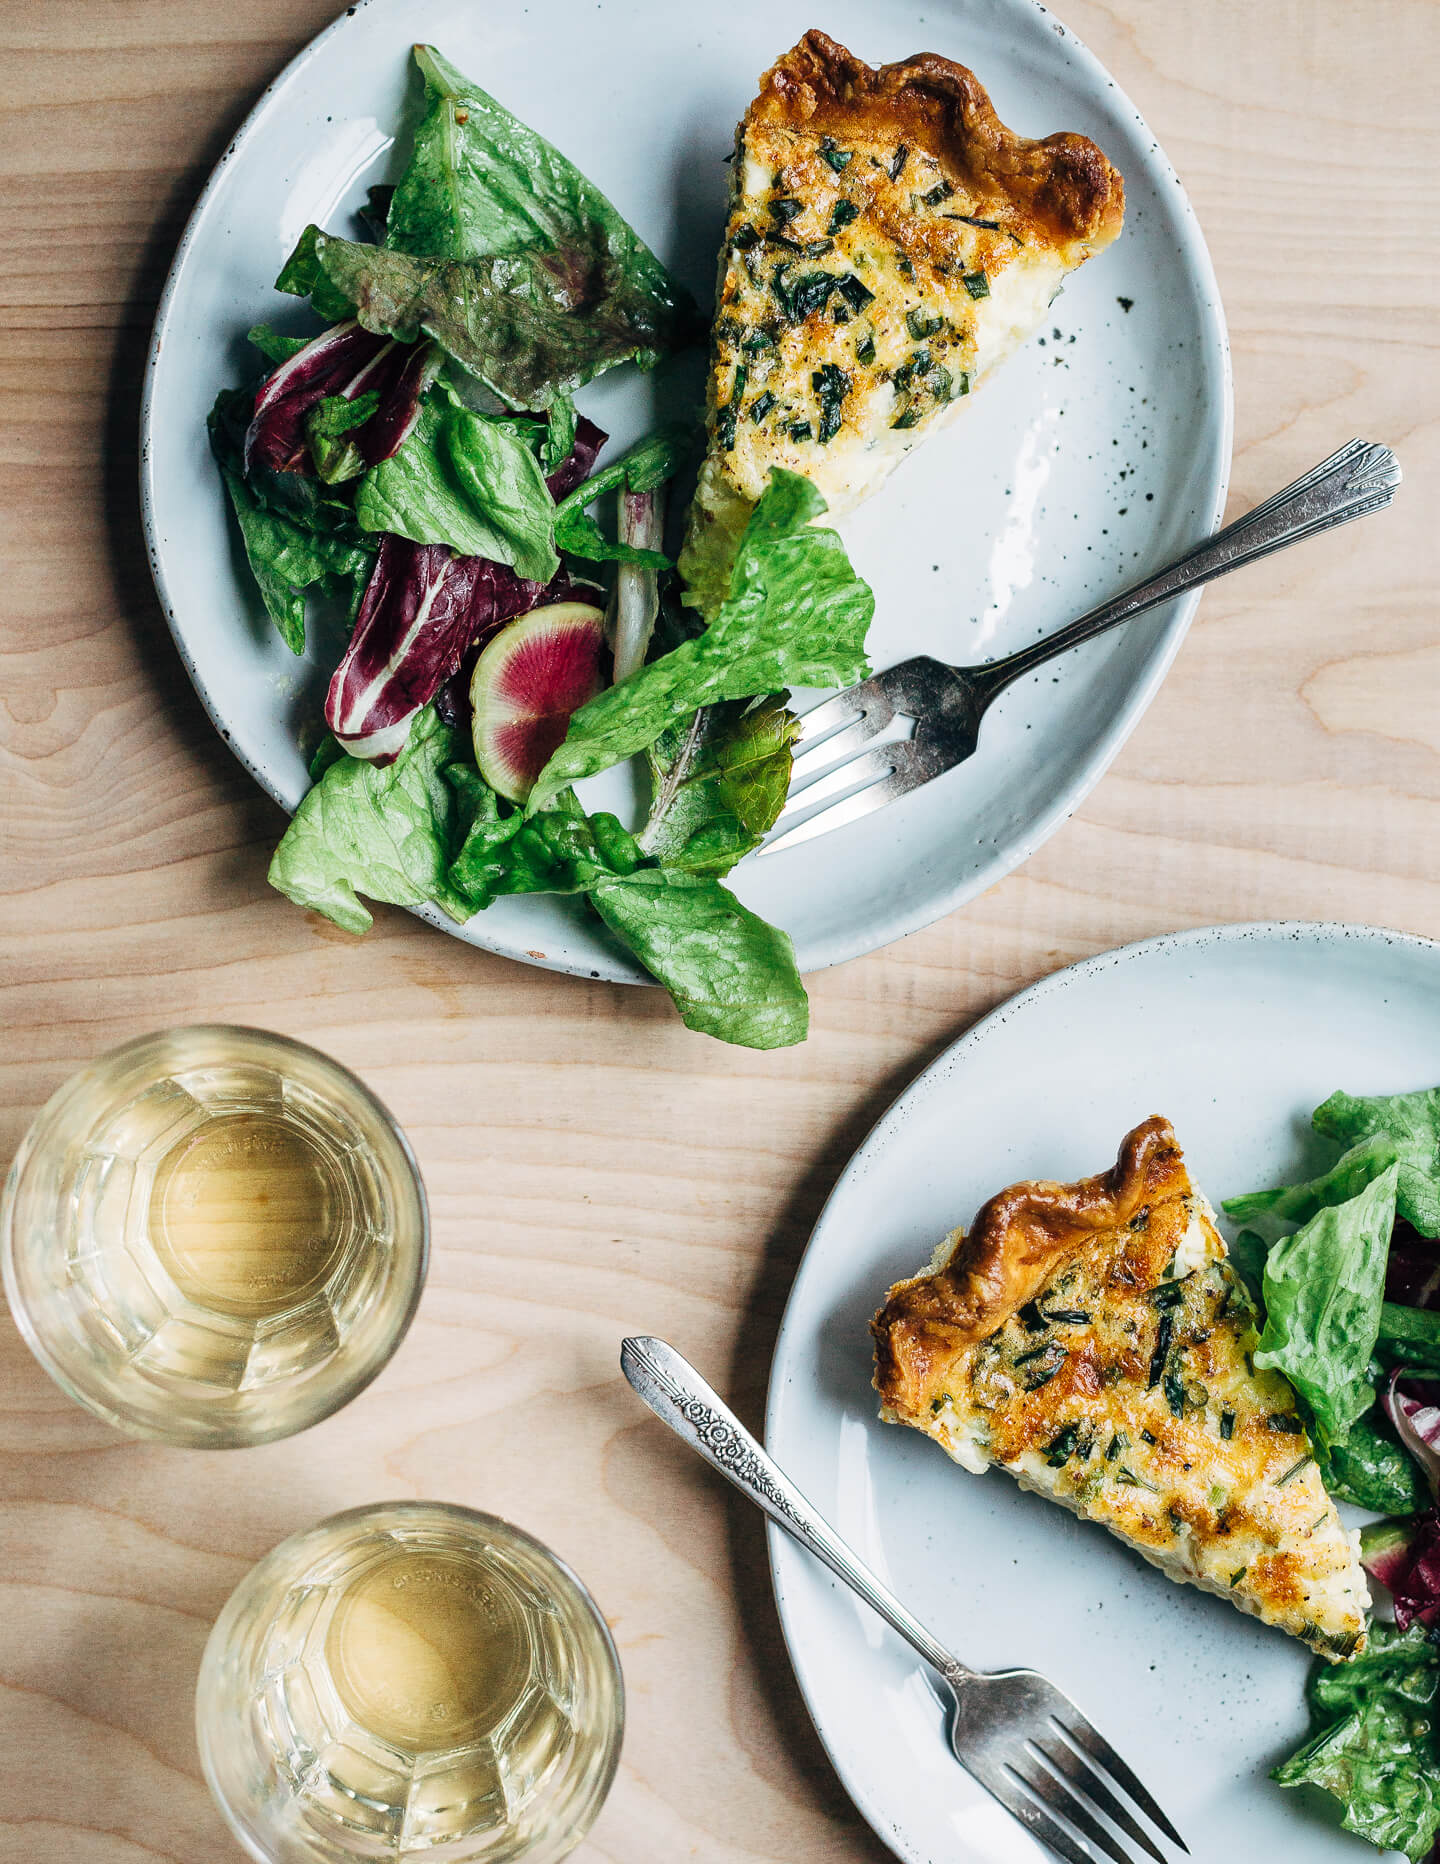 Cheddar quiche slices served with a lemony green salad. 